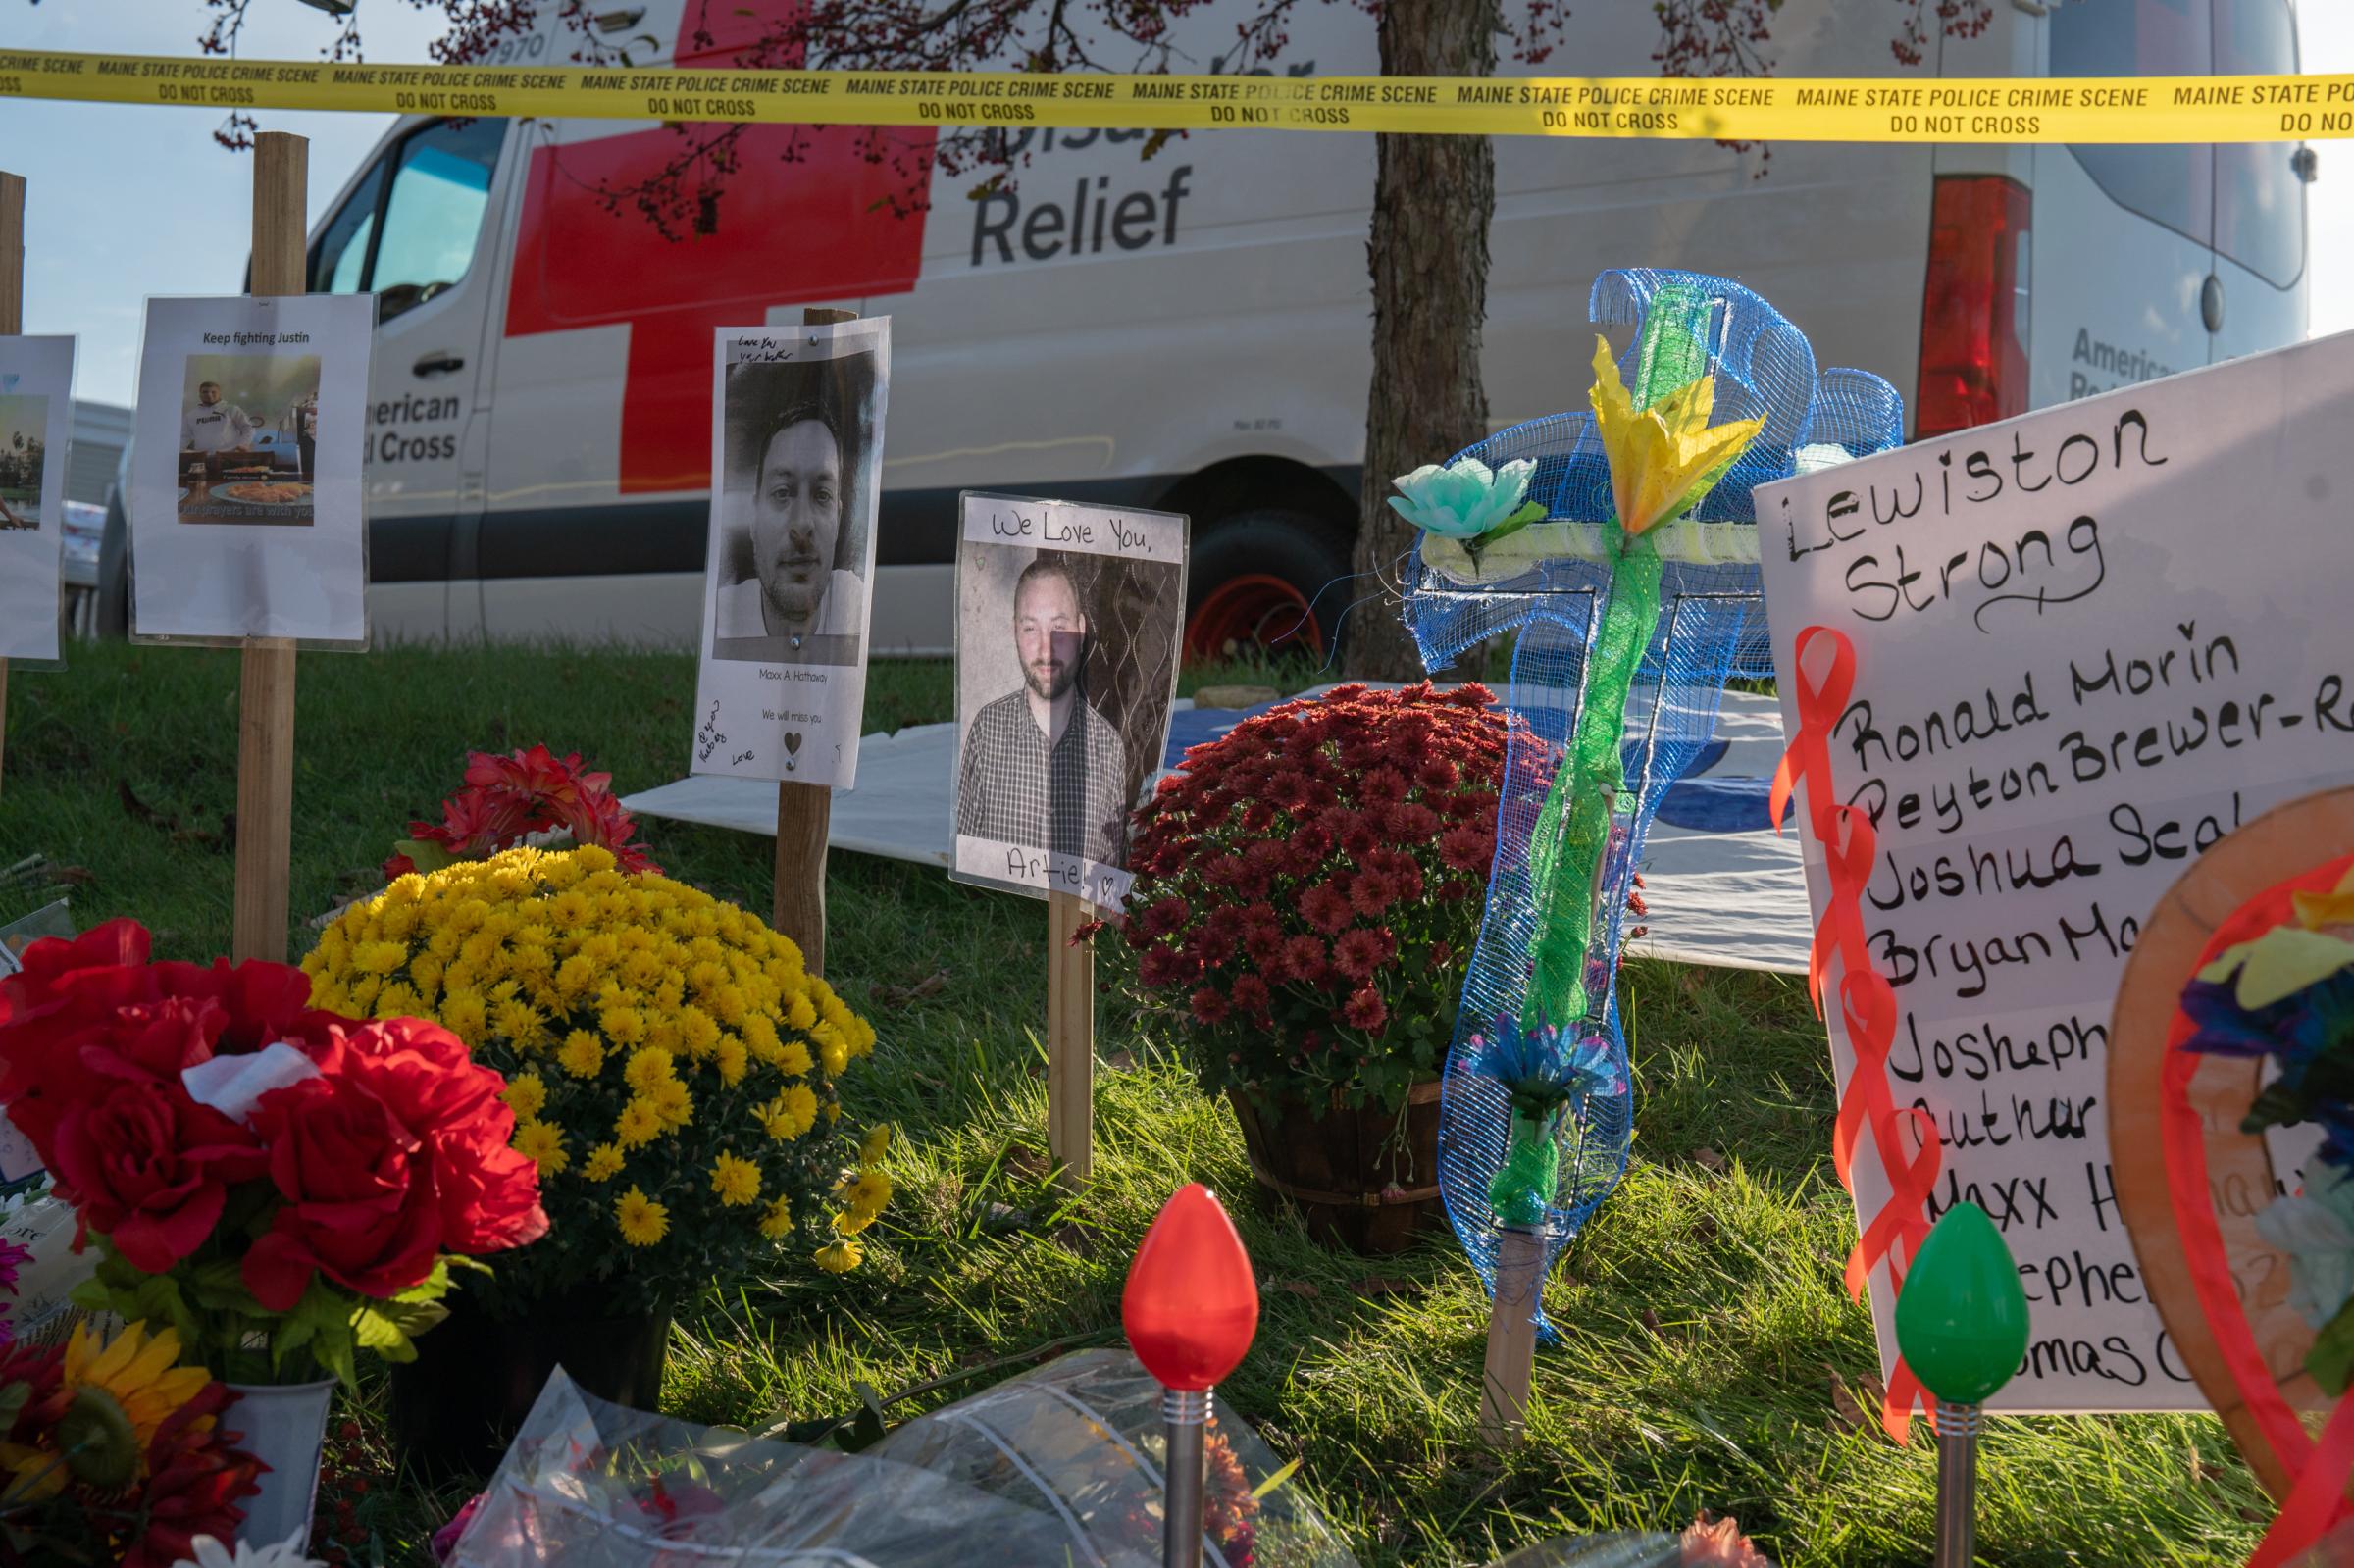 Wash Post - Aftermath of Lewiston Shooting  - Decorative memorabilia on display outside of Schemengees...